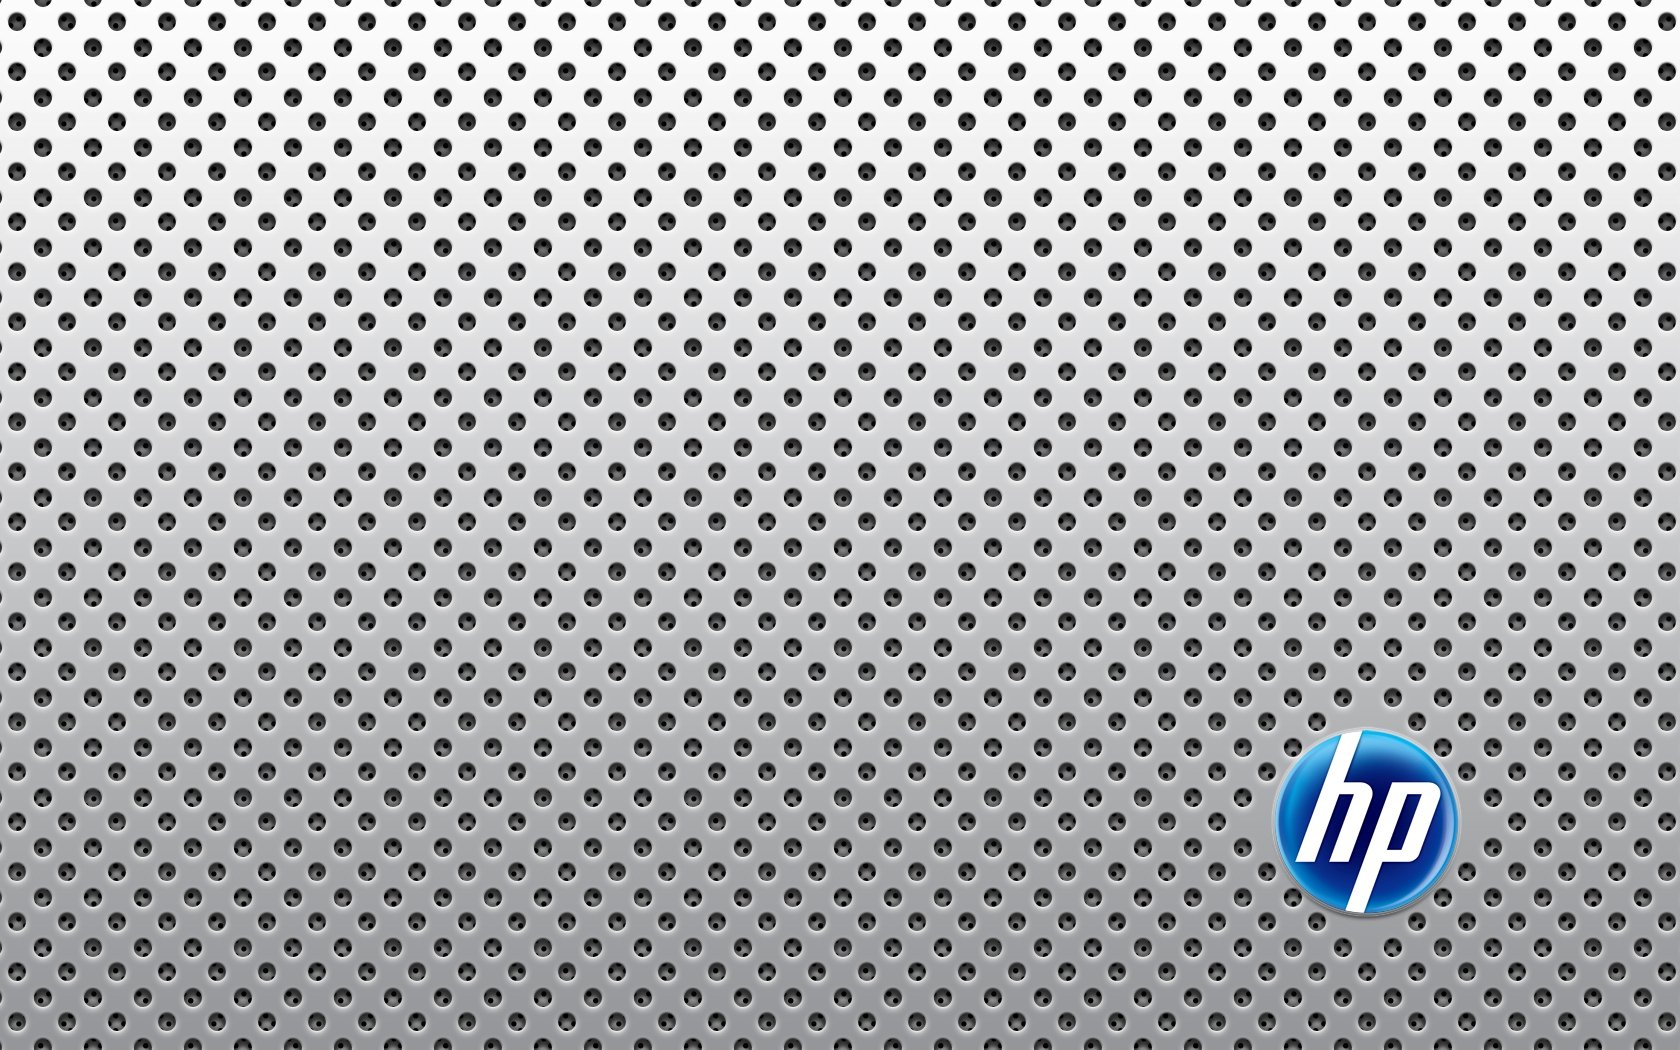 Hp Laptop Background   HD Wallpapers